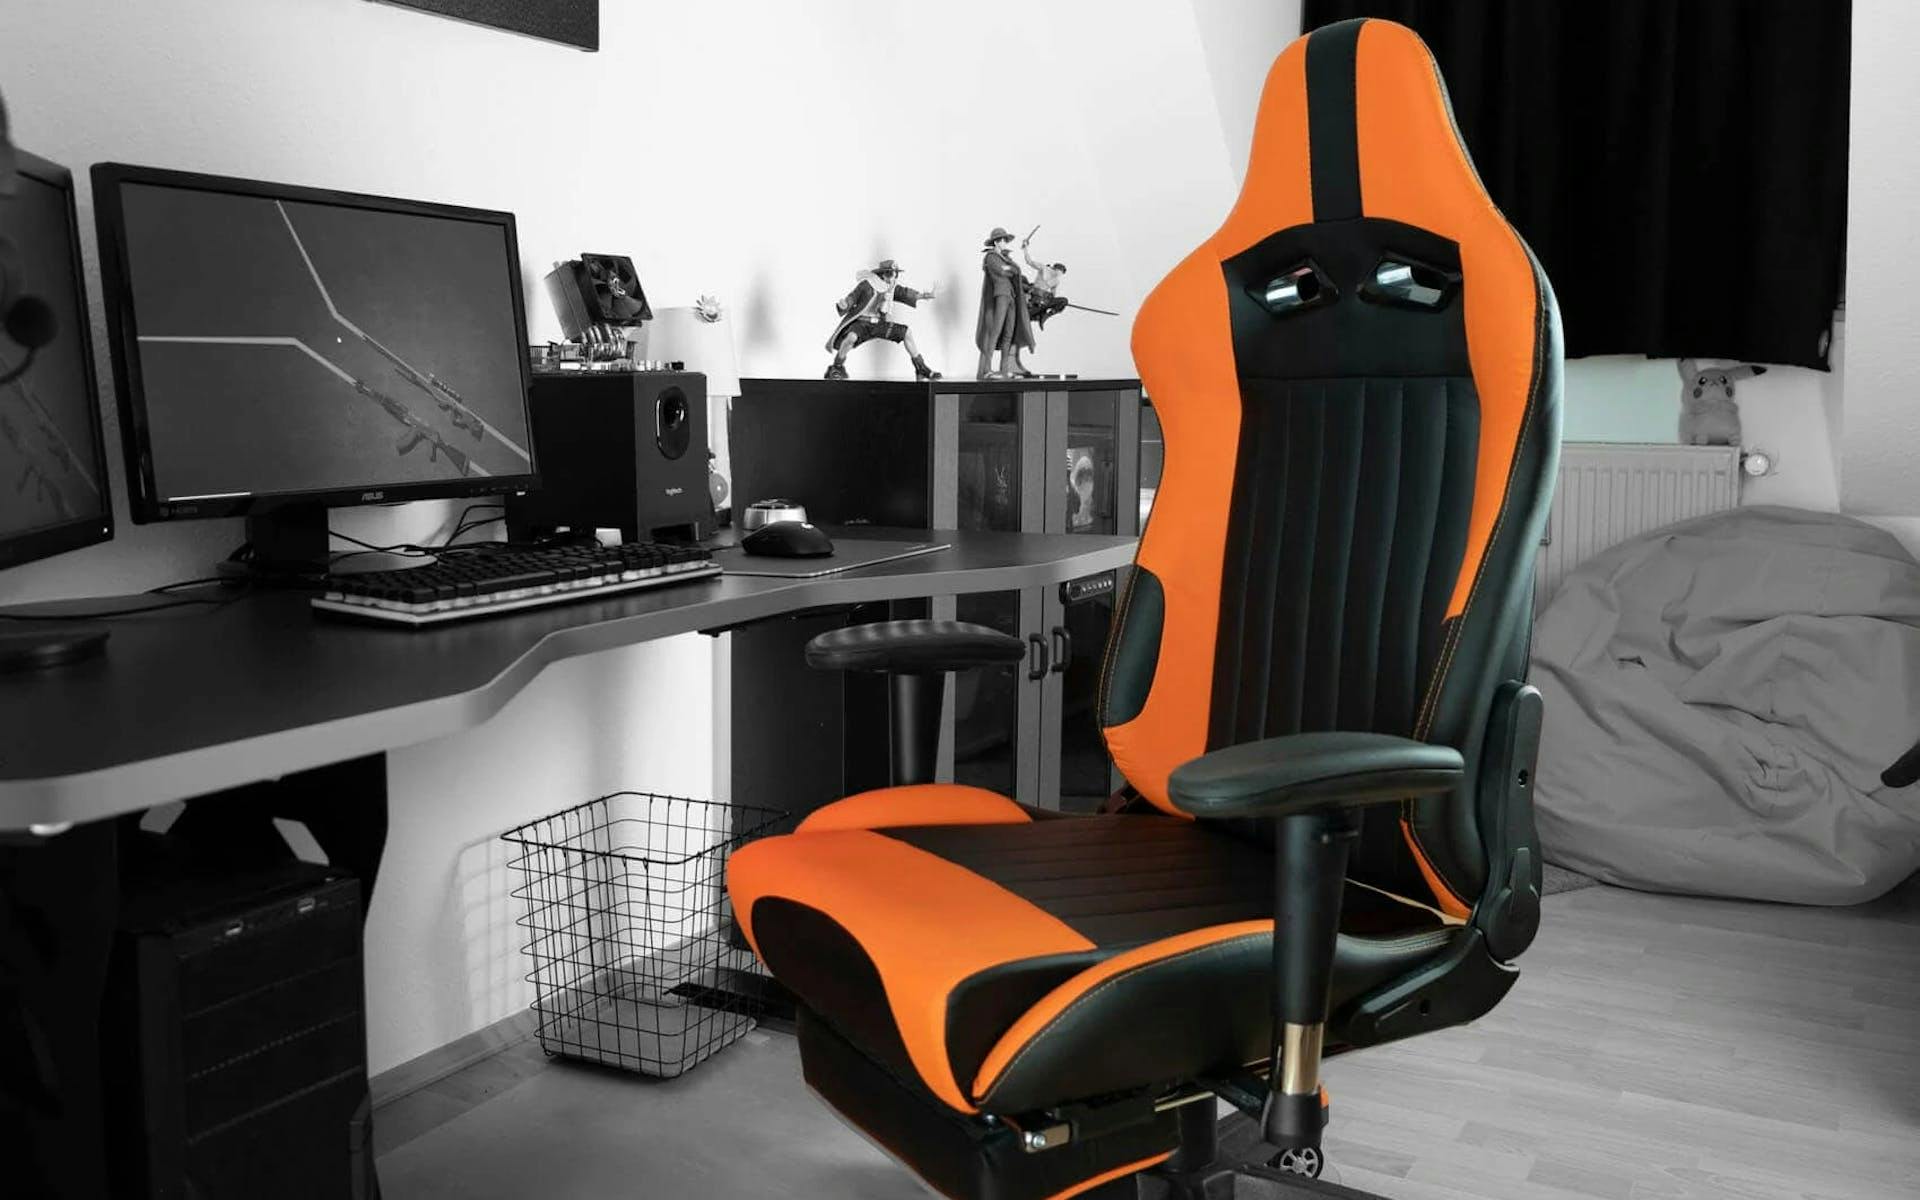 The chair is essential for any gaming furniture | Credit: LeetDesk